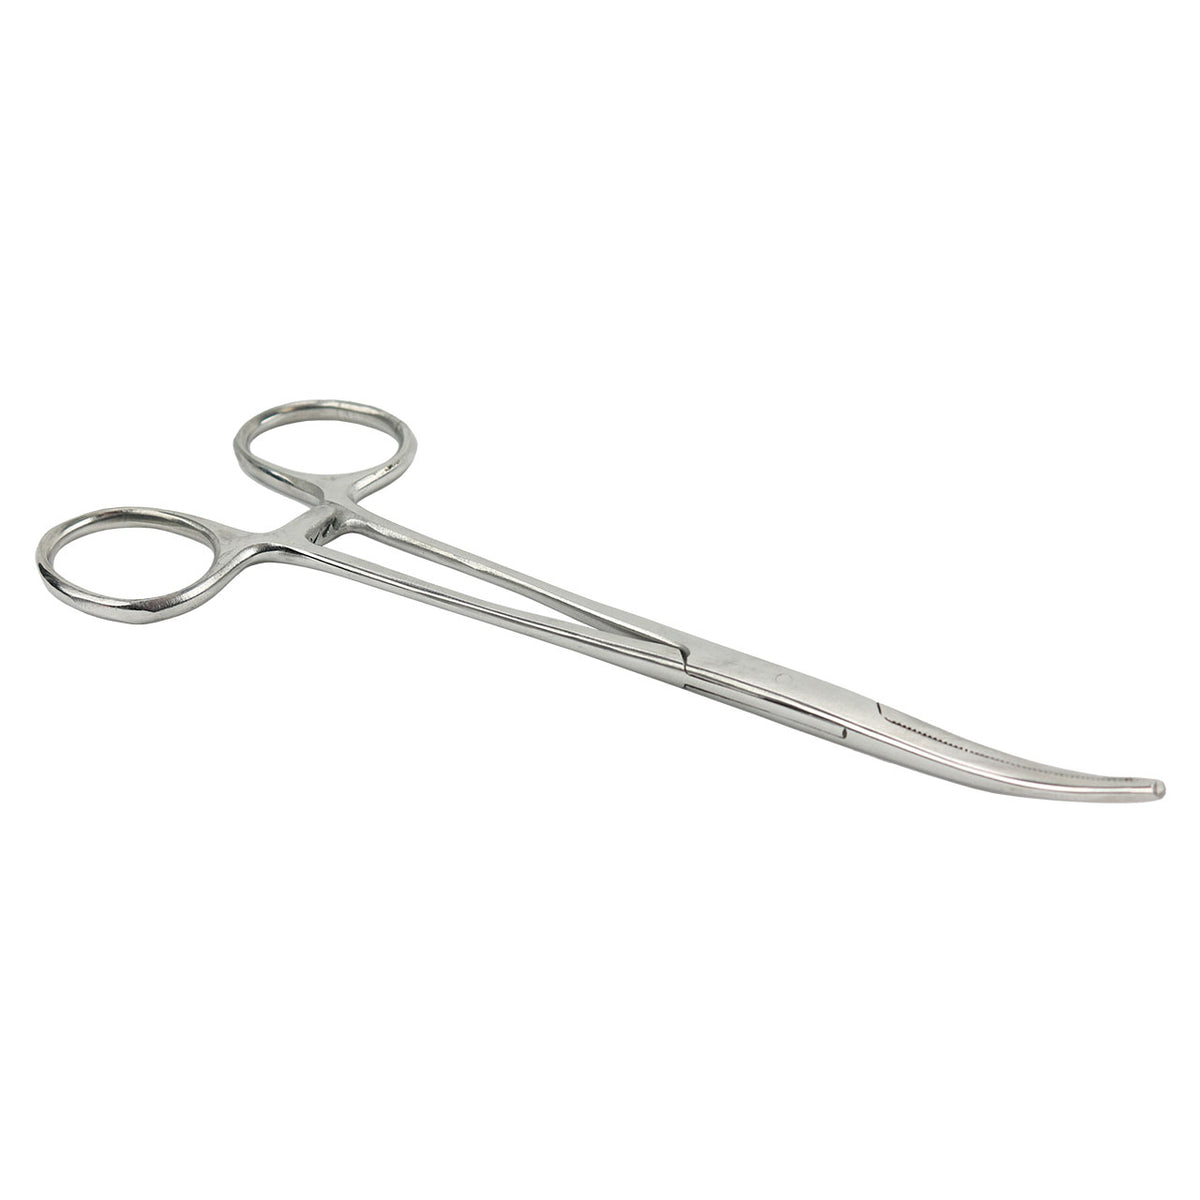 Angler's Image Curved Forceps